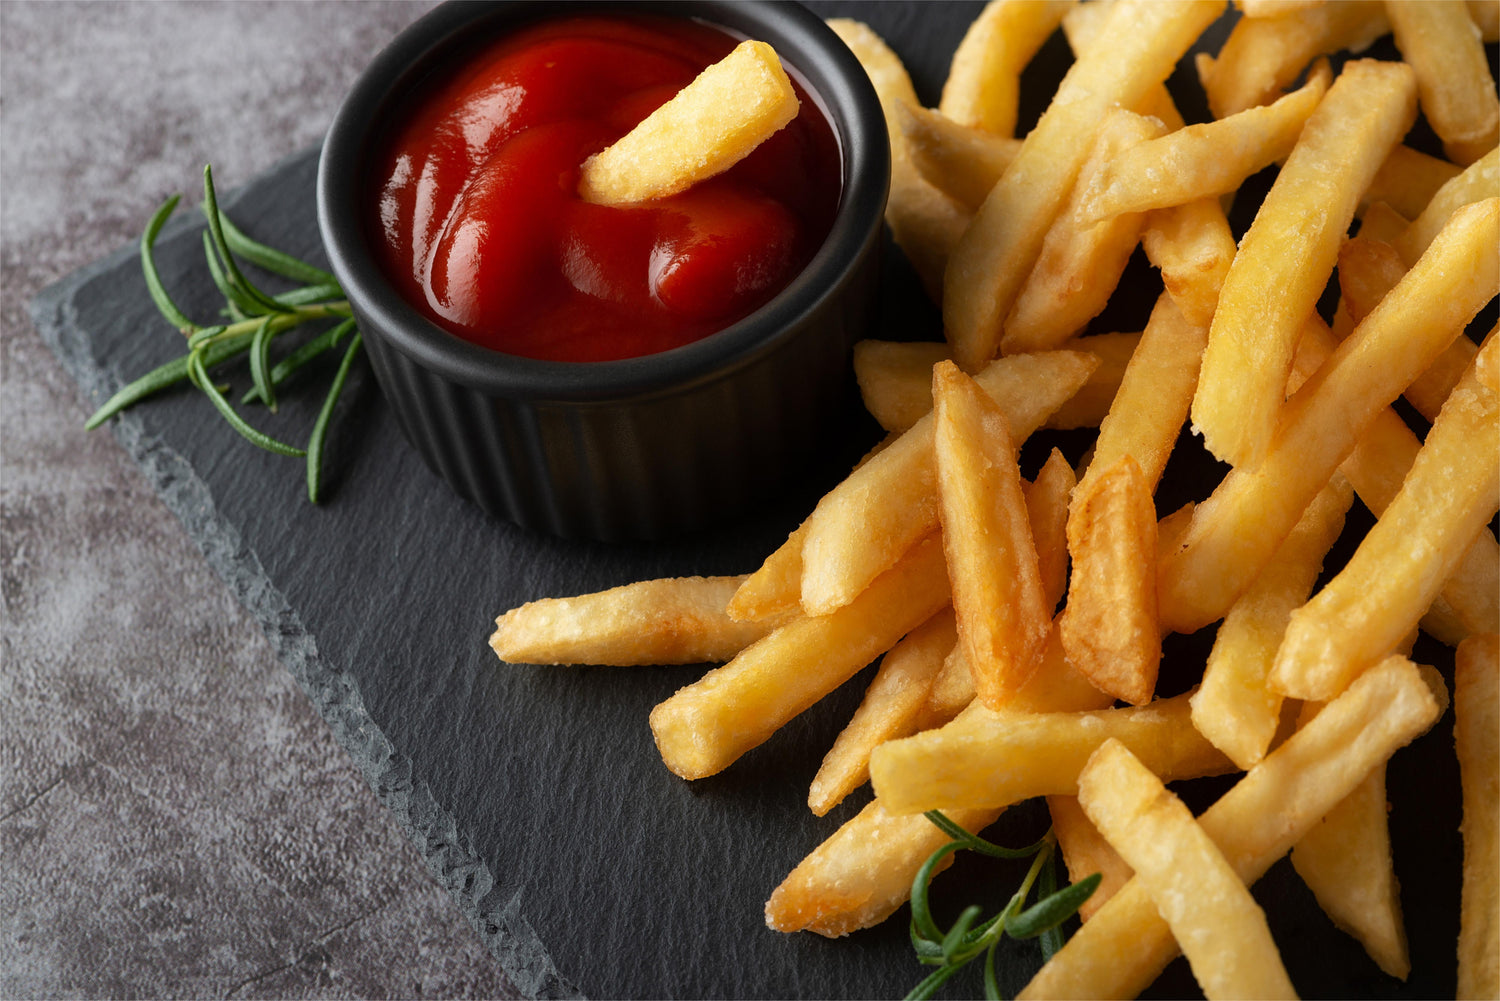 With the X&E air fryer, you can enjoy the crispy texture and amazing taste of French fries with a fraction of the calories.